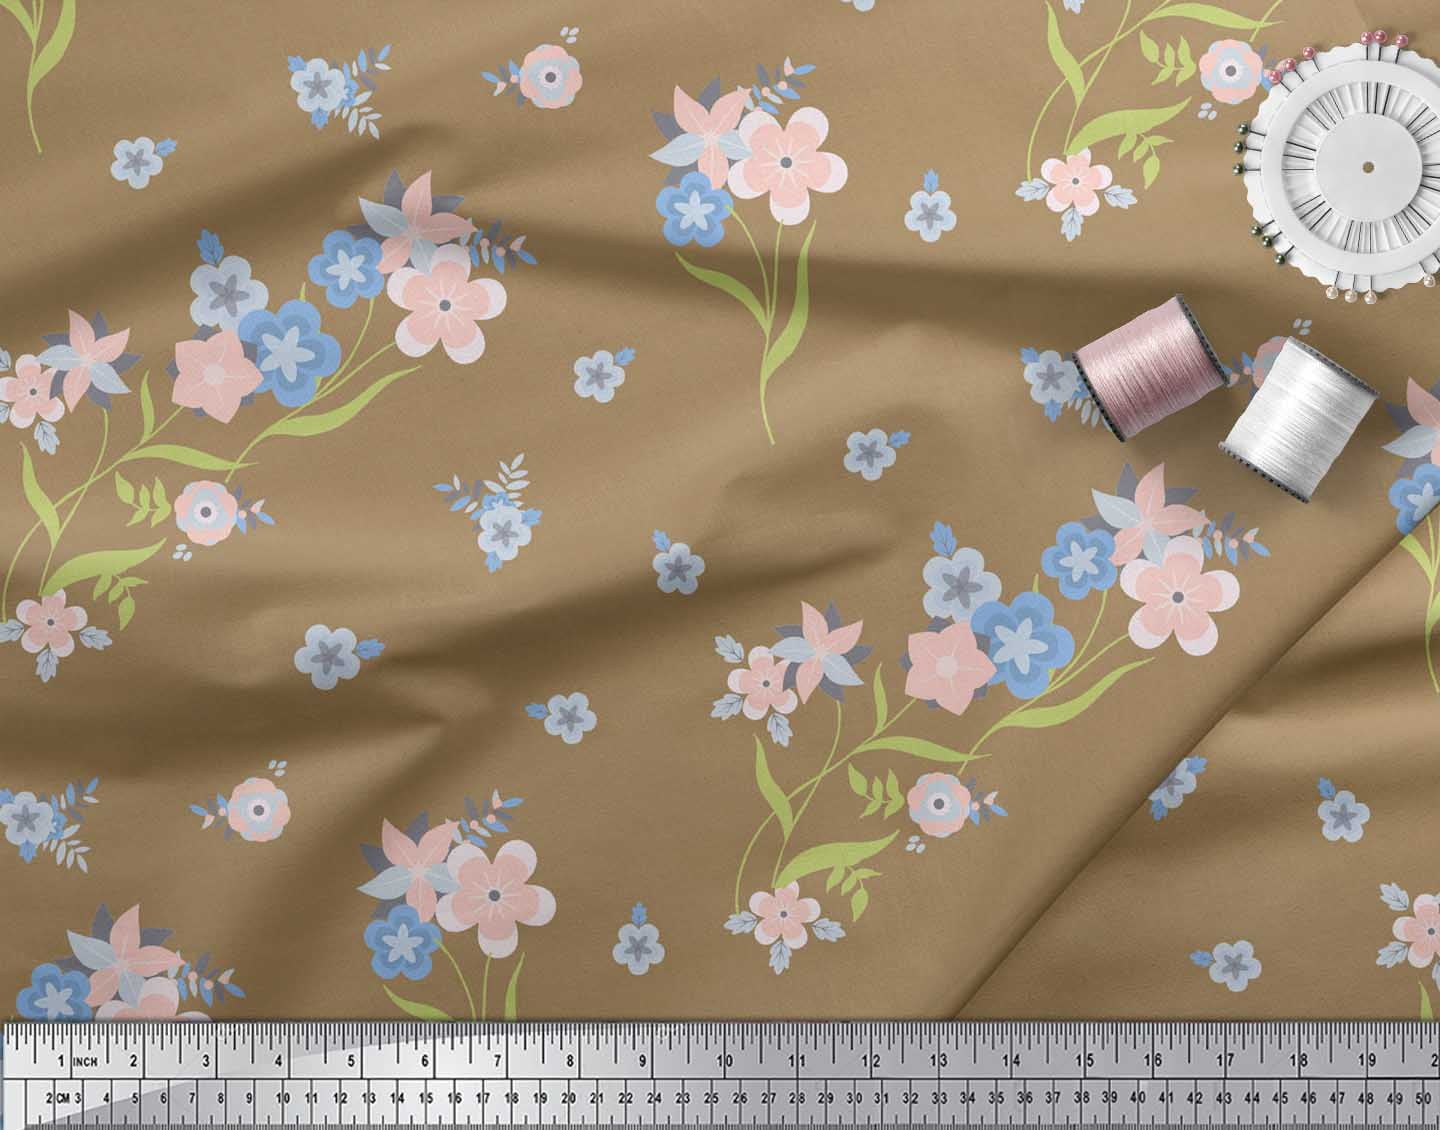  Soimoi Blue Poly Crepe Fabric Leaves & Periwinkle Floral Print  Fabric by The Yard 52 Inch Wide : Everything Else